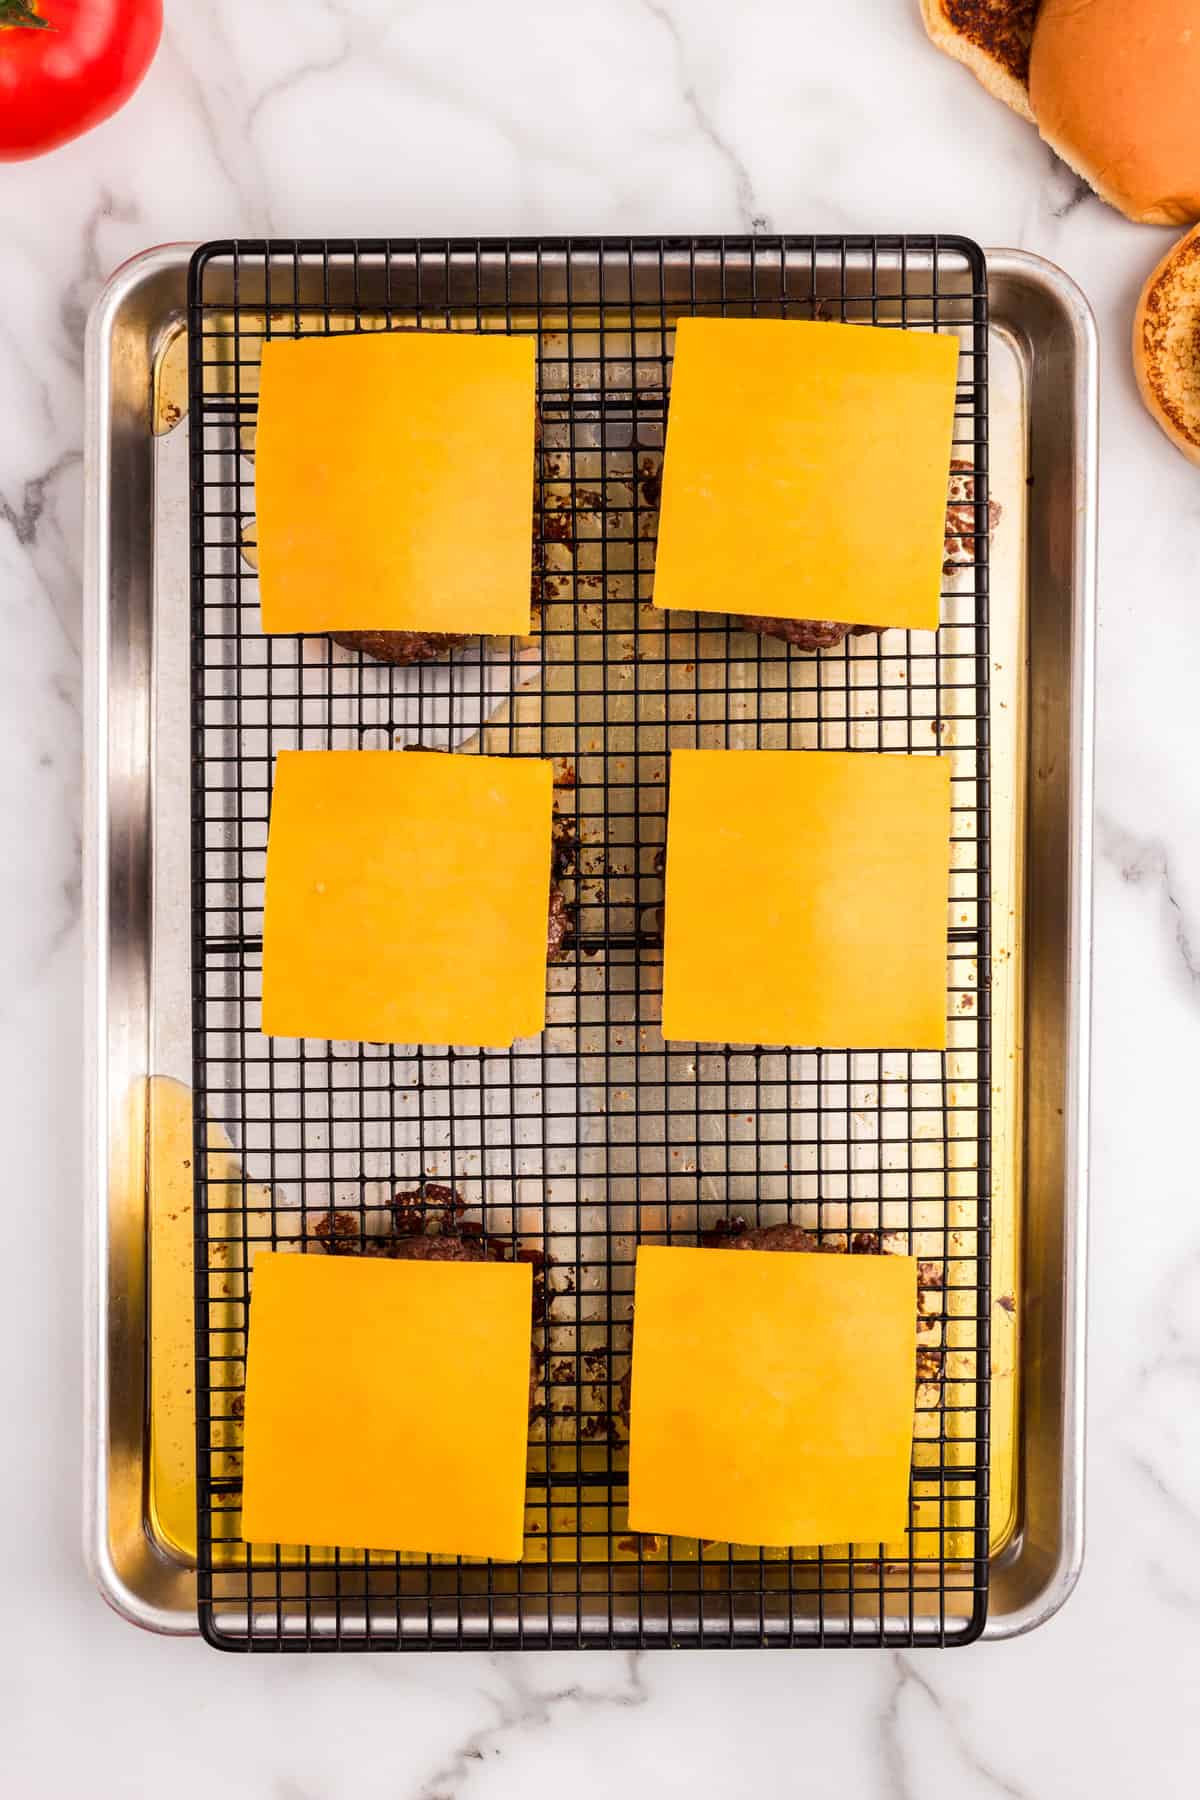 Adding sliced cheddar cheese to Baked Hamburgers on cooking grate